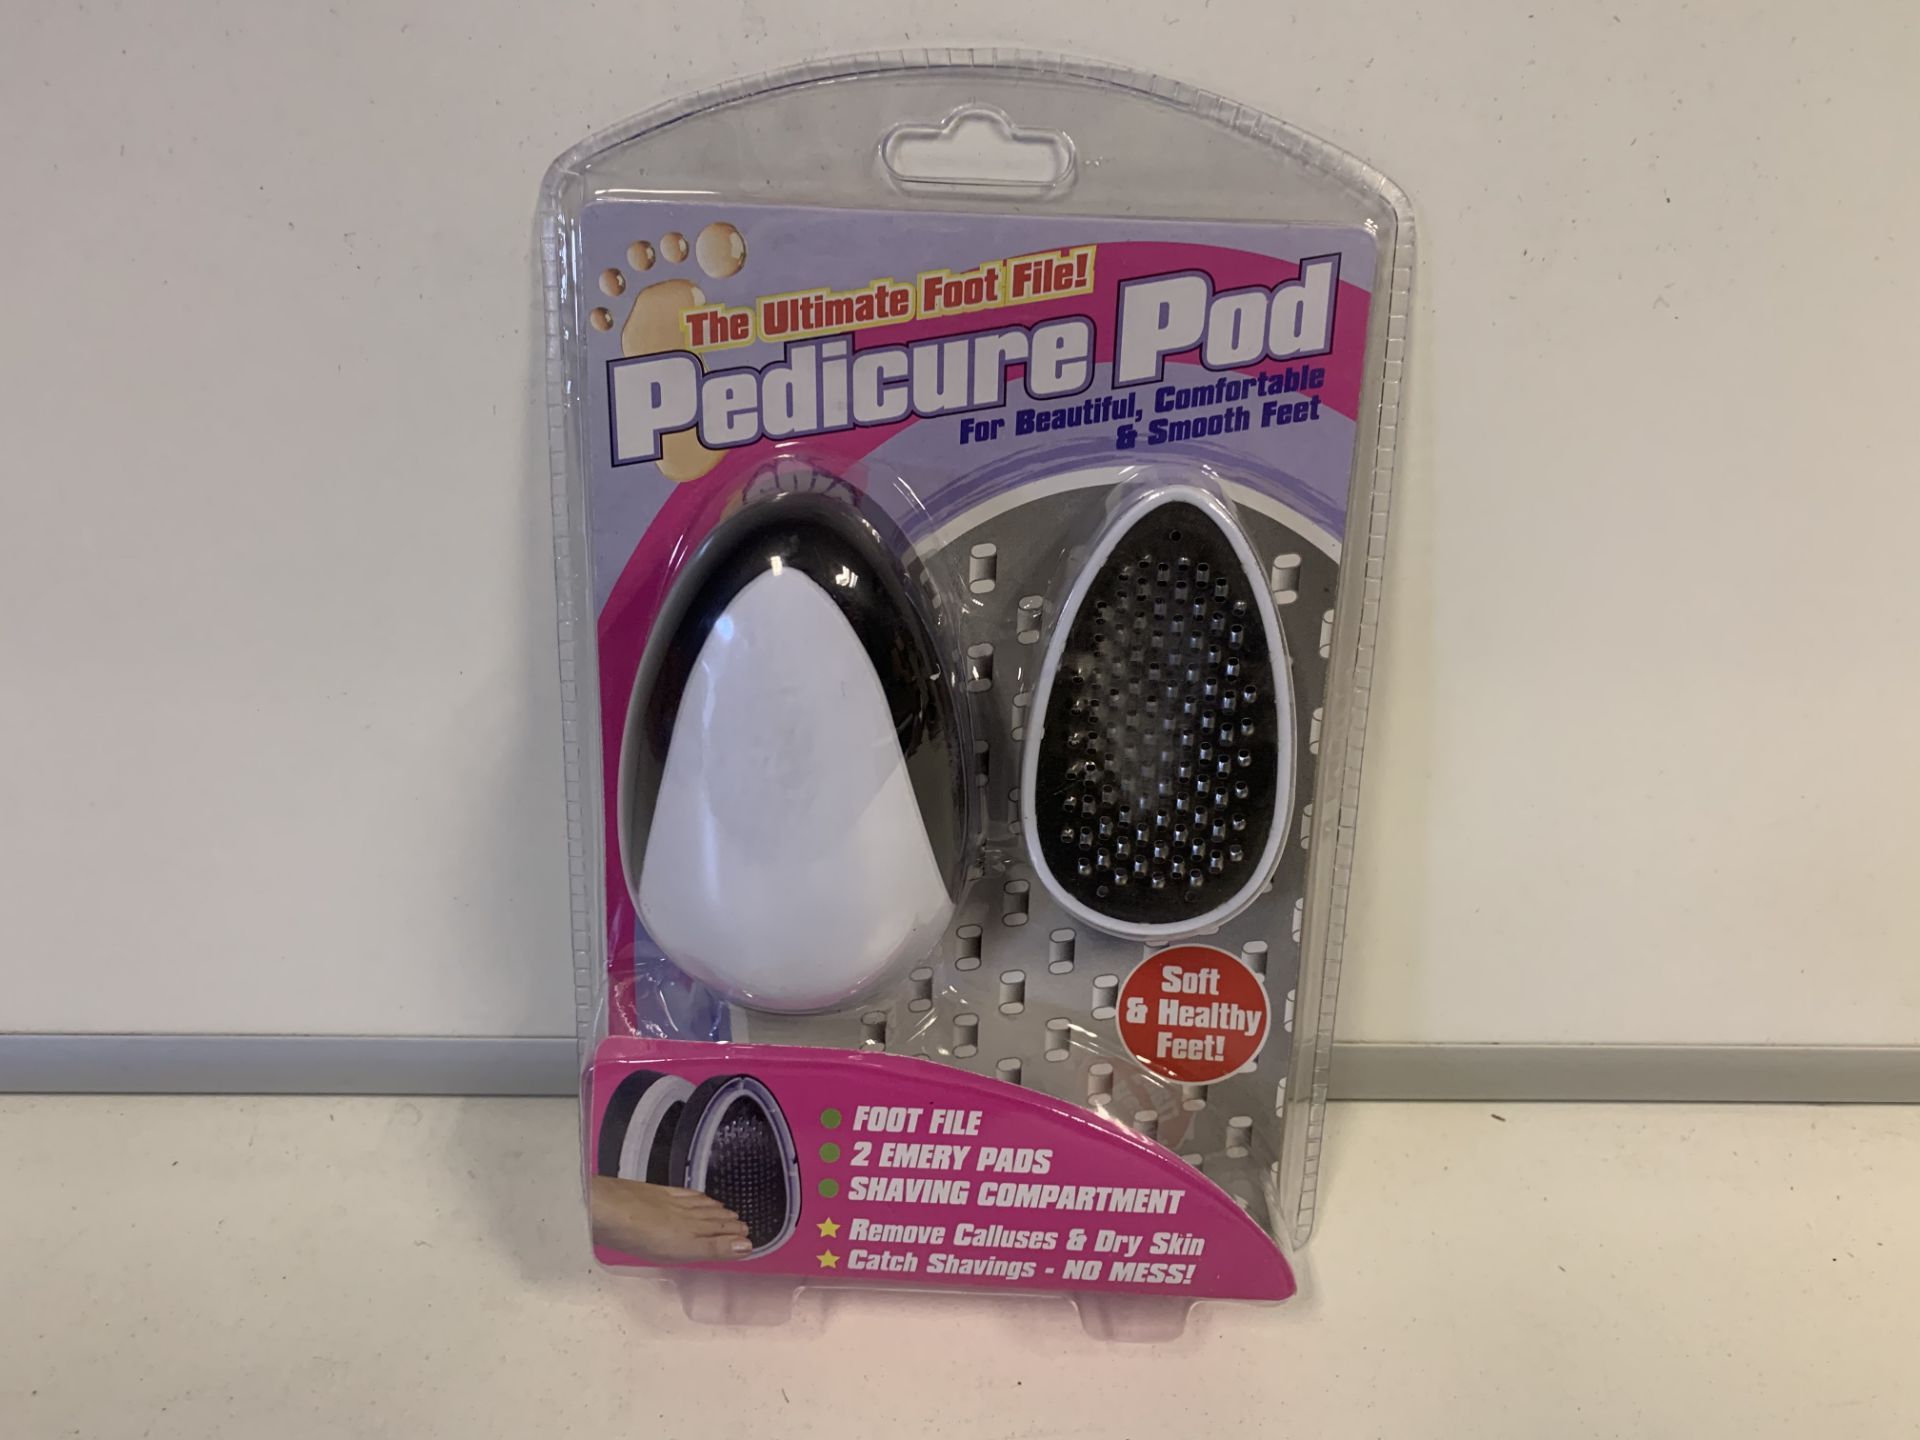 48 x NEW PEDICURE POD. THE ULTIMATE FOOT FILES. RRP £7.99 EACH (1221/30)